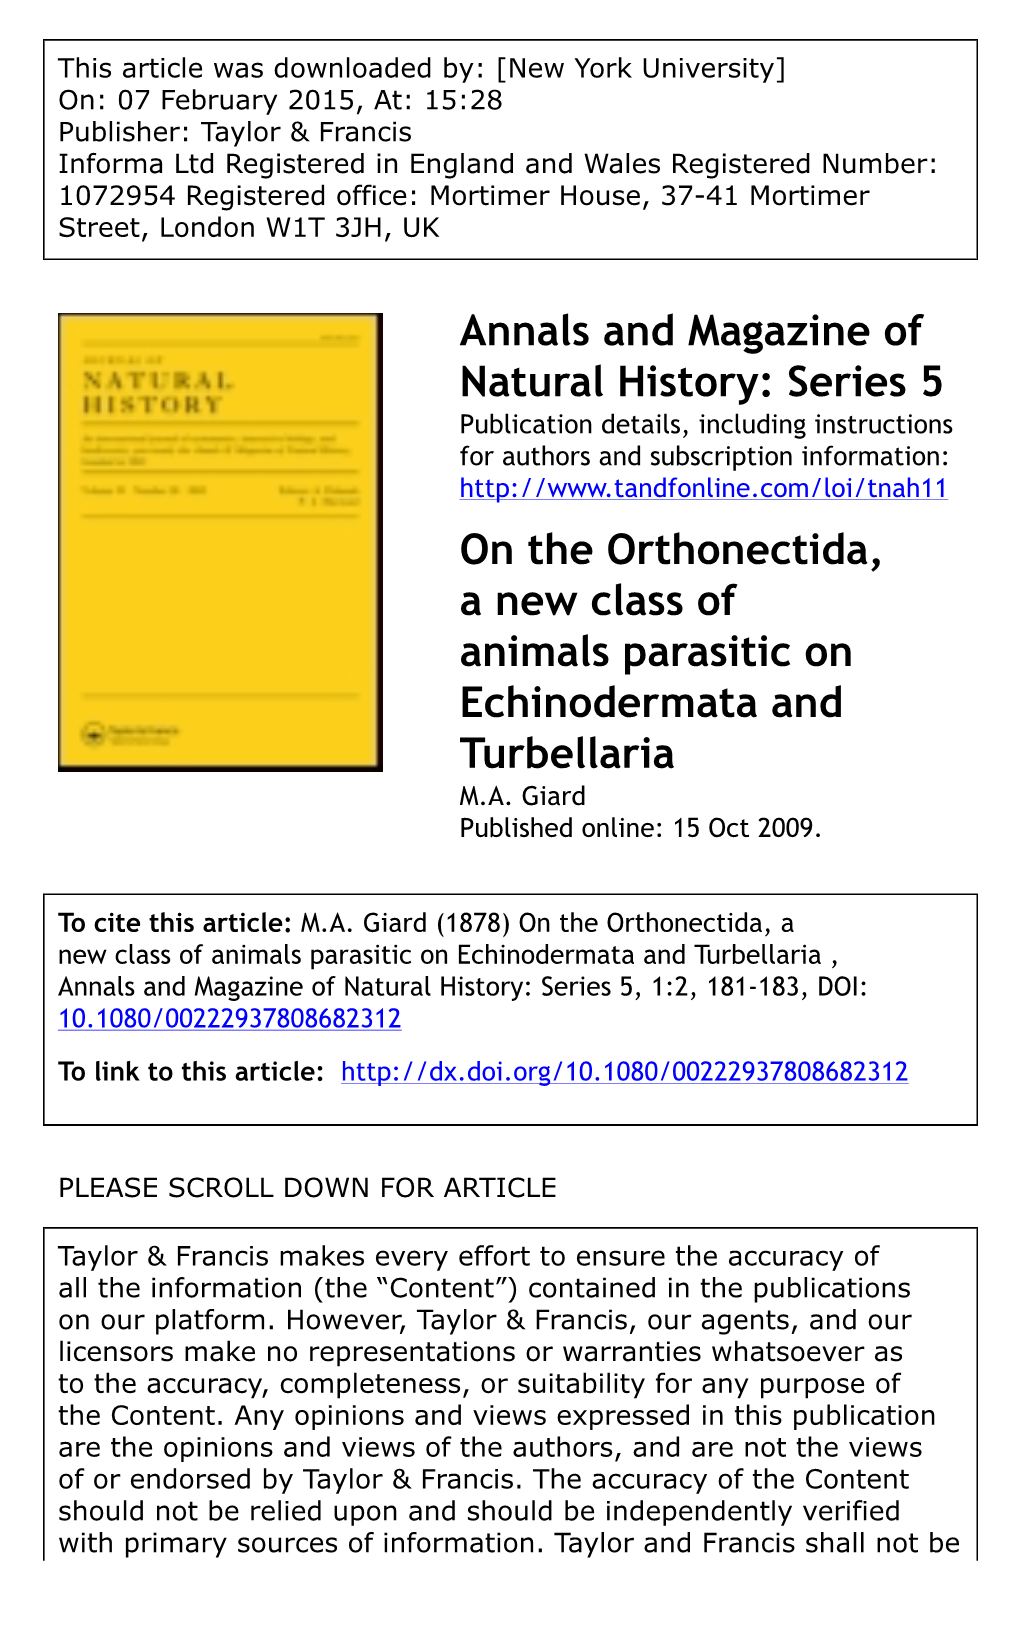 Series 5 on the Orthonectida, a New Class of Animals Parasitic on Echinodermata and Turb